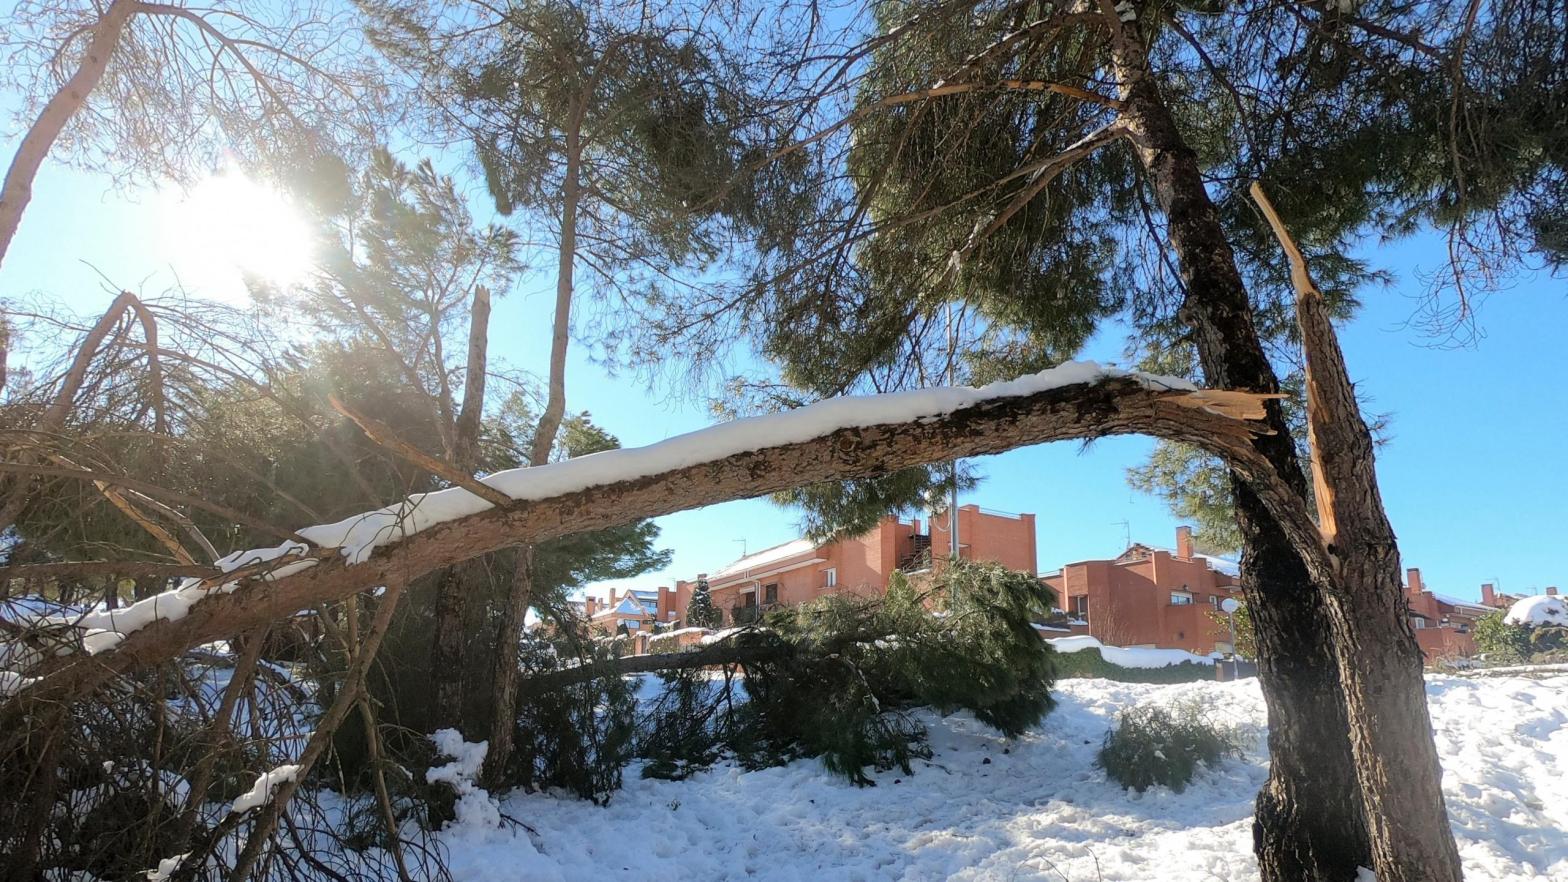 Fallen trees and branches at a public park on January 11, 2021, in Majadahona, Madrid, Spain (Photo: Miguel Pereira, Getty Images)